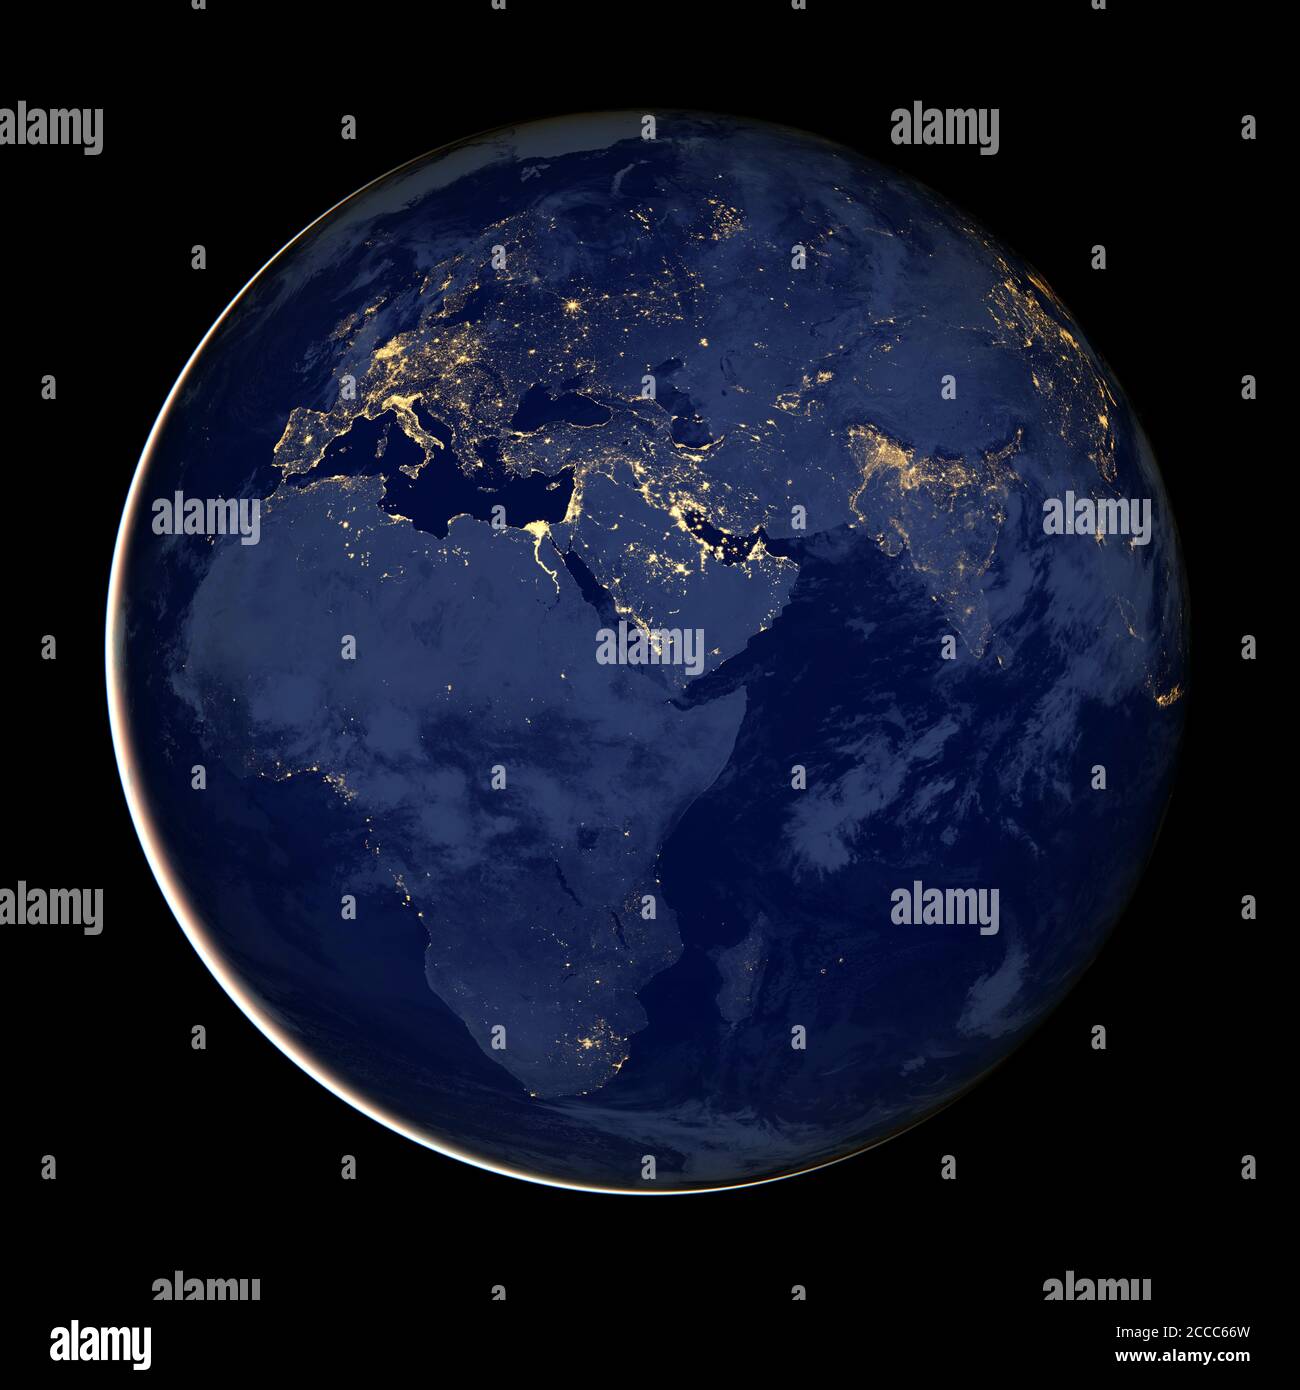 This composite image - made from NASA satellite data - shows the Eastern Hemisphere of the Earth at night - Photo: Geopix/NASA/Alamy Stock Photo Stock Photo